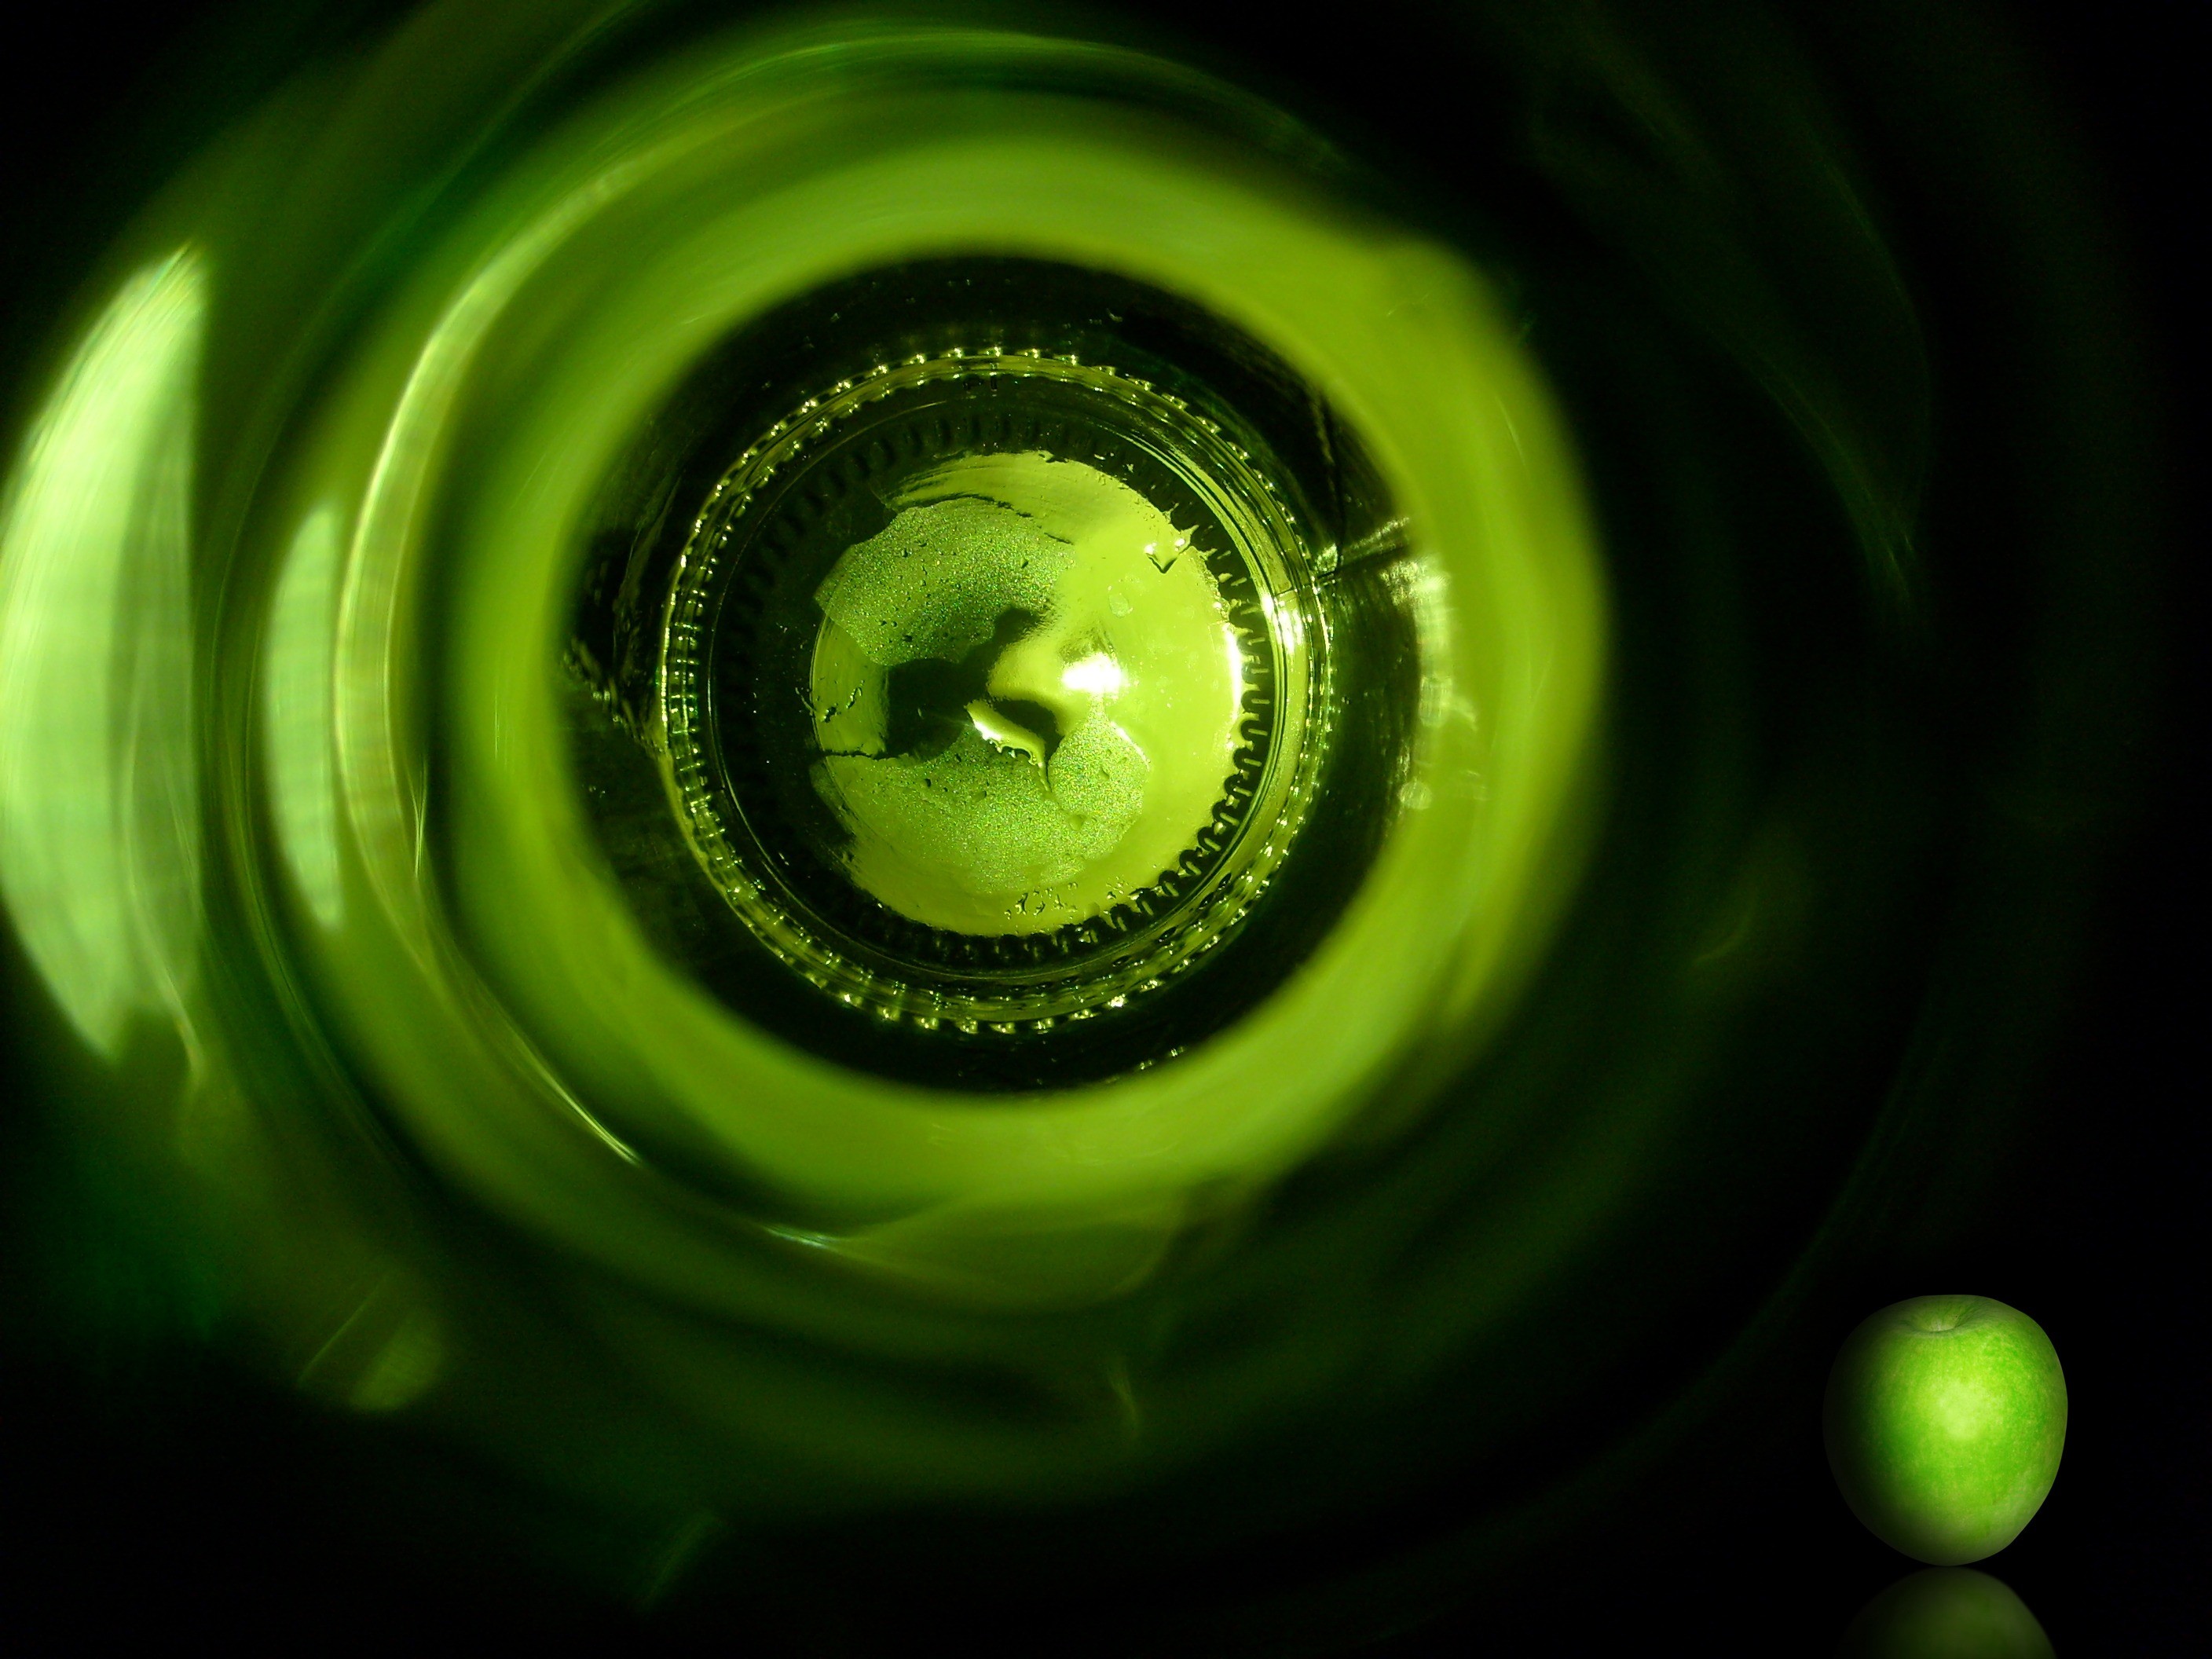 2816x2112 Free Images : grass, light, leaf, tube, flower, glass, green, color, clean,  drink, darkness, bottle, empty, yellow, beer, alcohol, circle, close up,  eye, ...